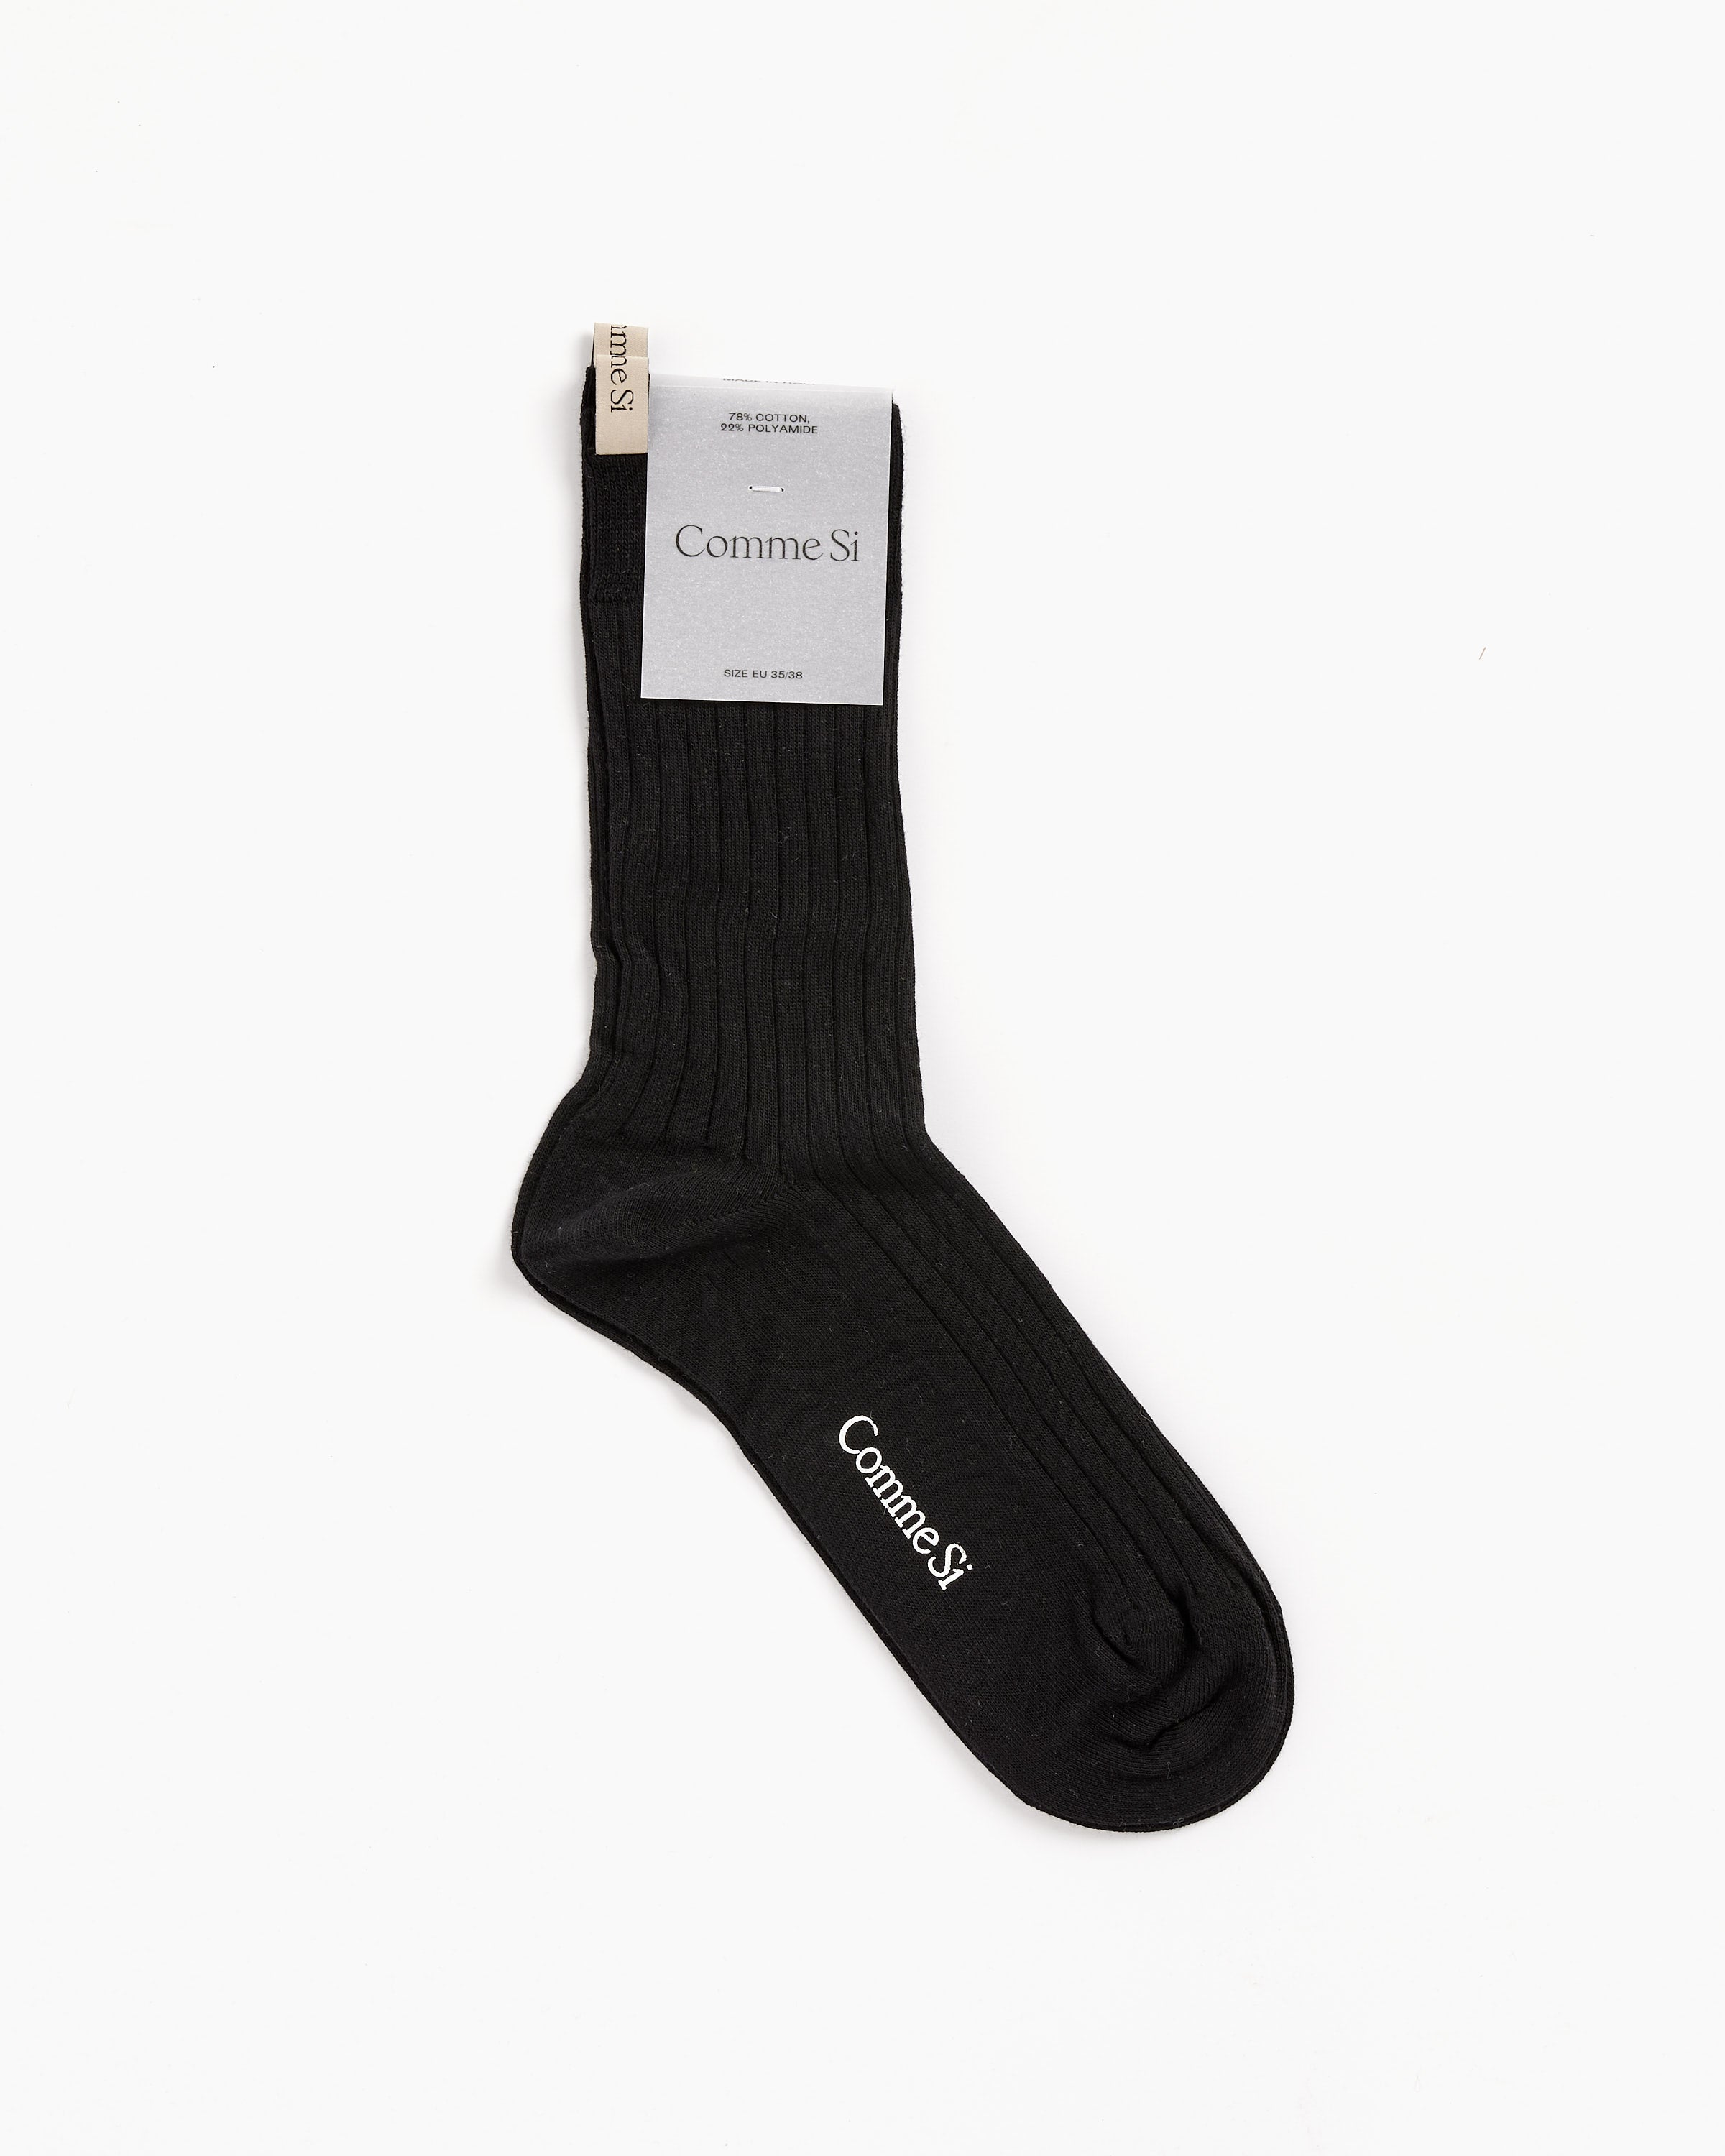 Mohawk General Store | Comme Si | The Yves Socks in Black